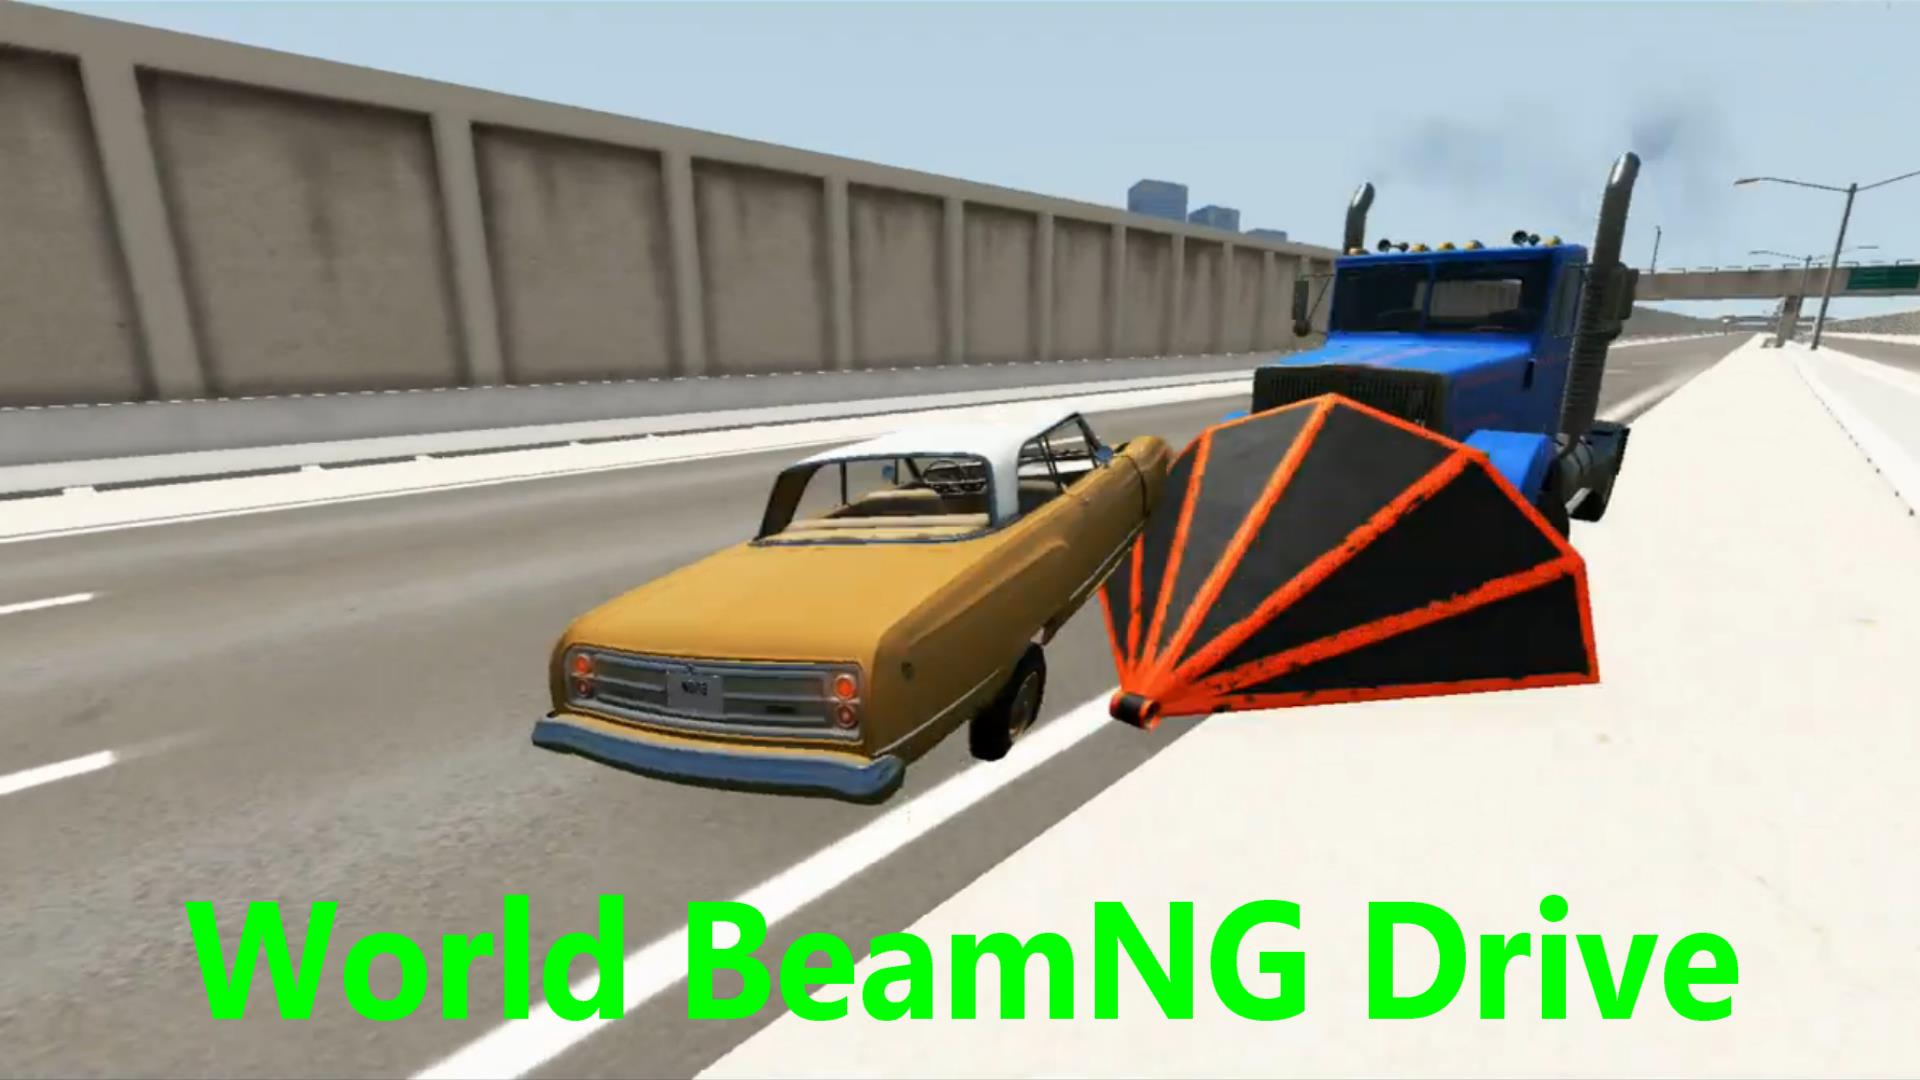 Beamng drive steam roller фото 97